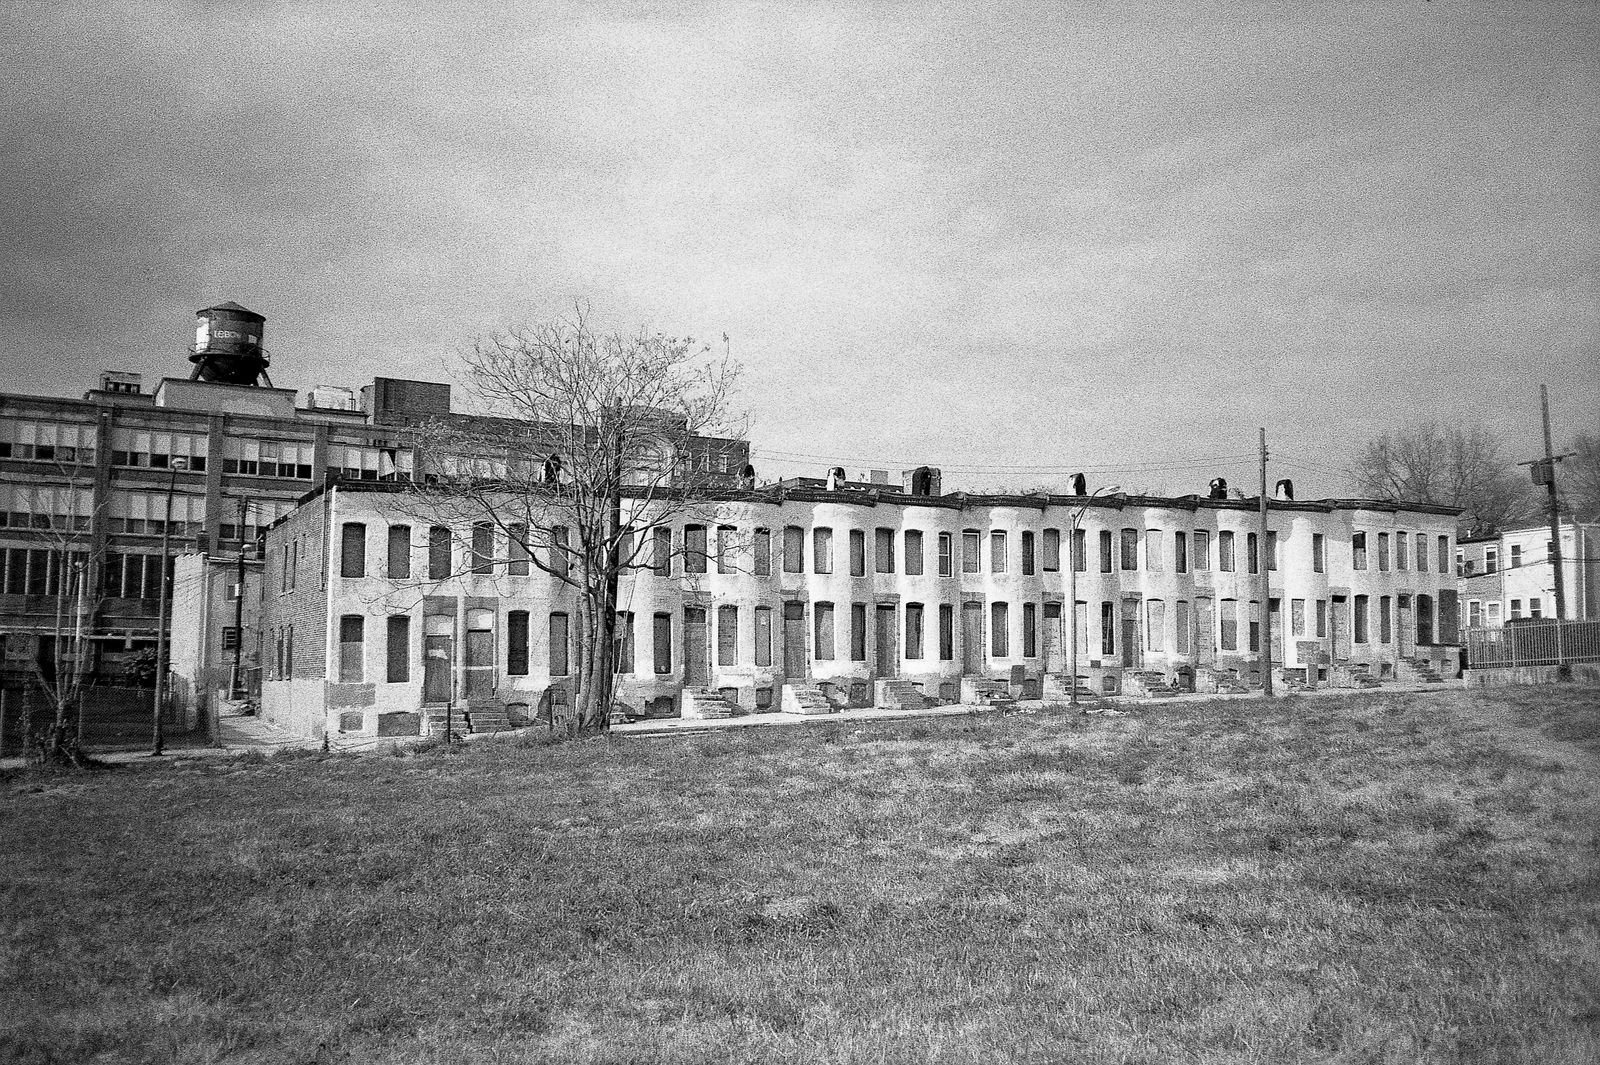 © John Perivolaris - Boarded Up Rowhouses, Border of Greenmount West and Oliver, Baltimore, 2009.